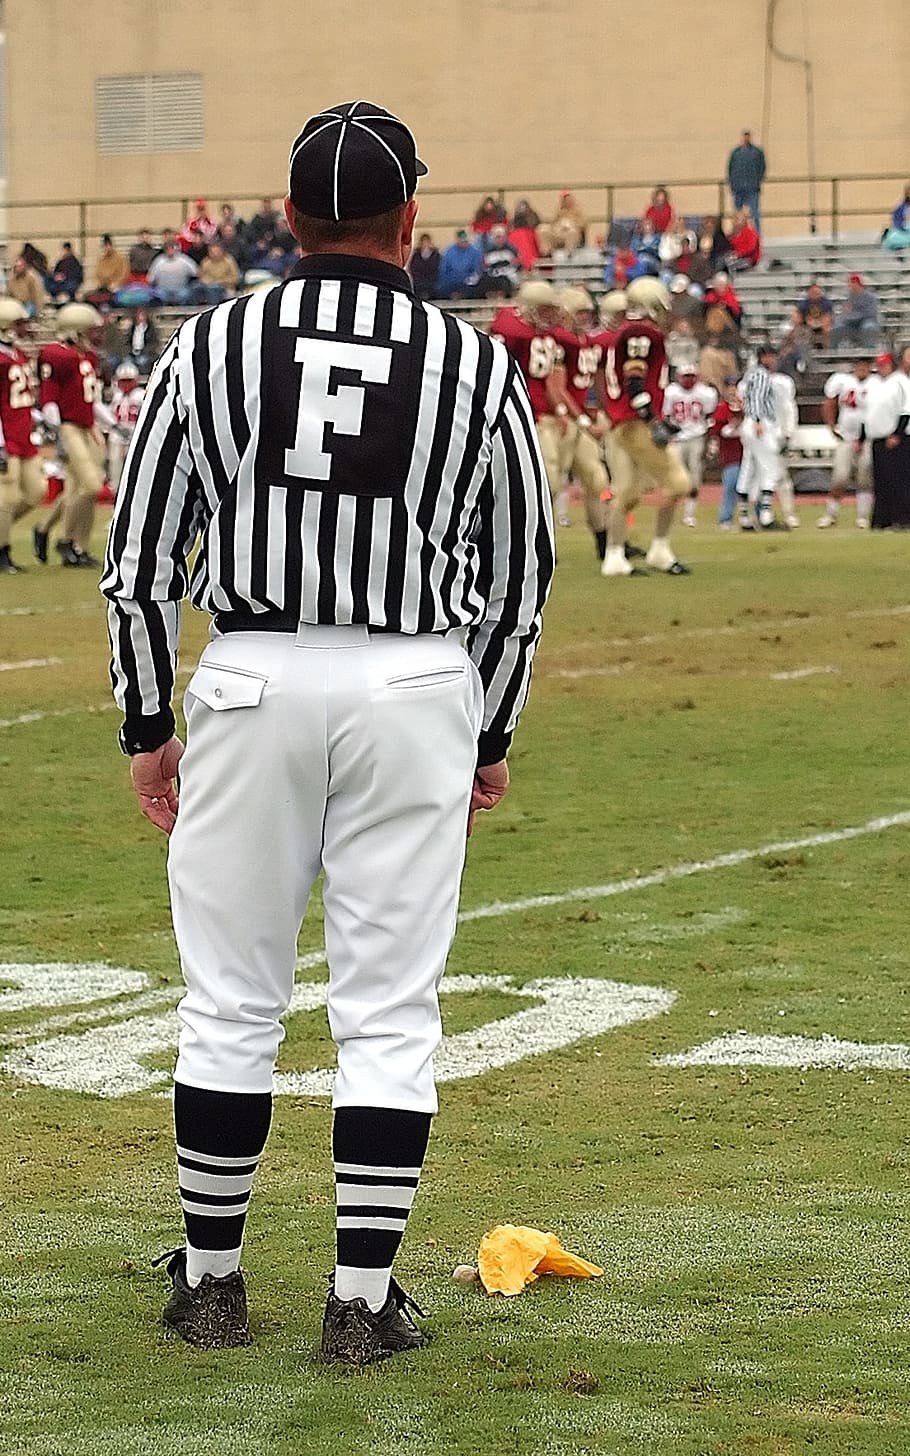 football official, official, field judge, american football, penalty, flag, judge, field, football, stripes